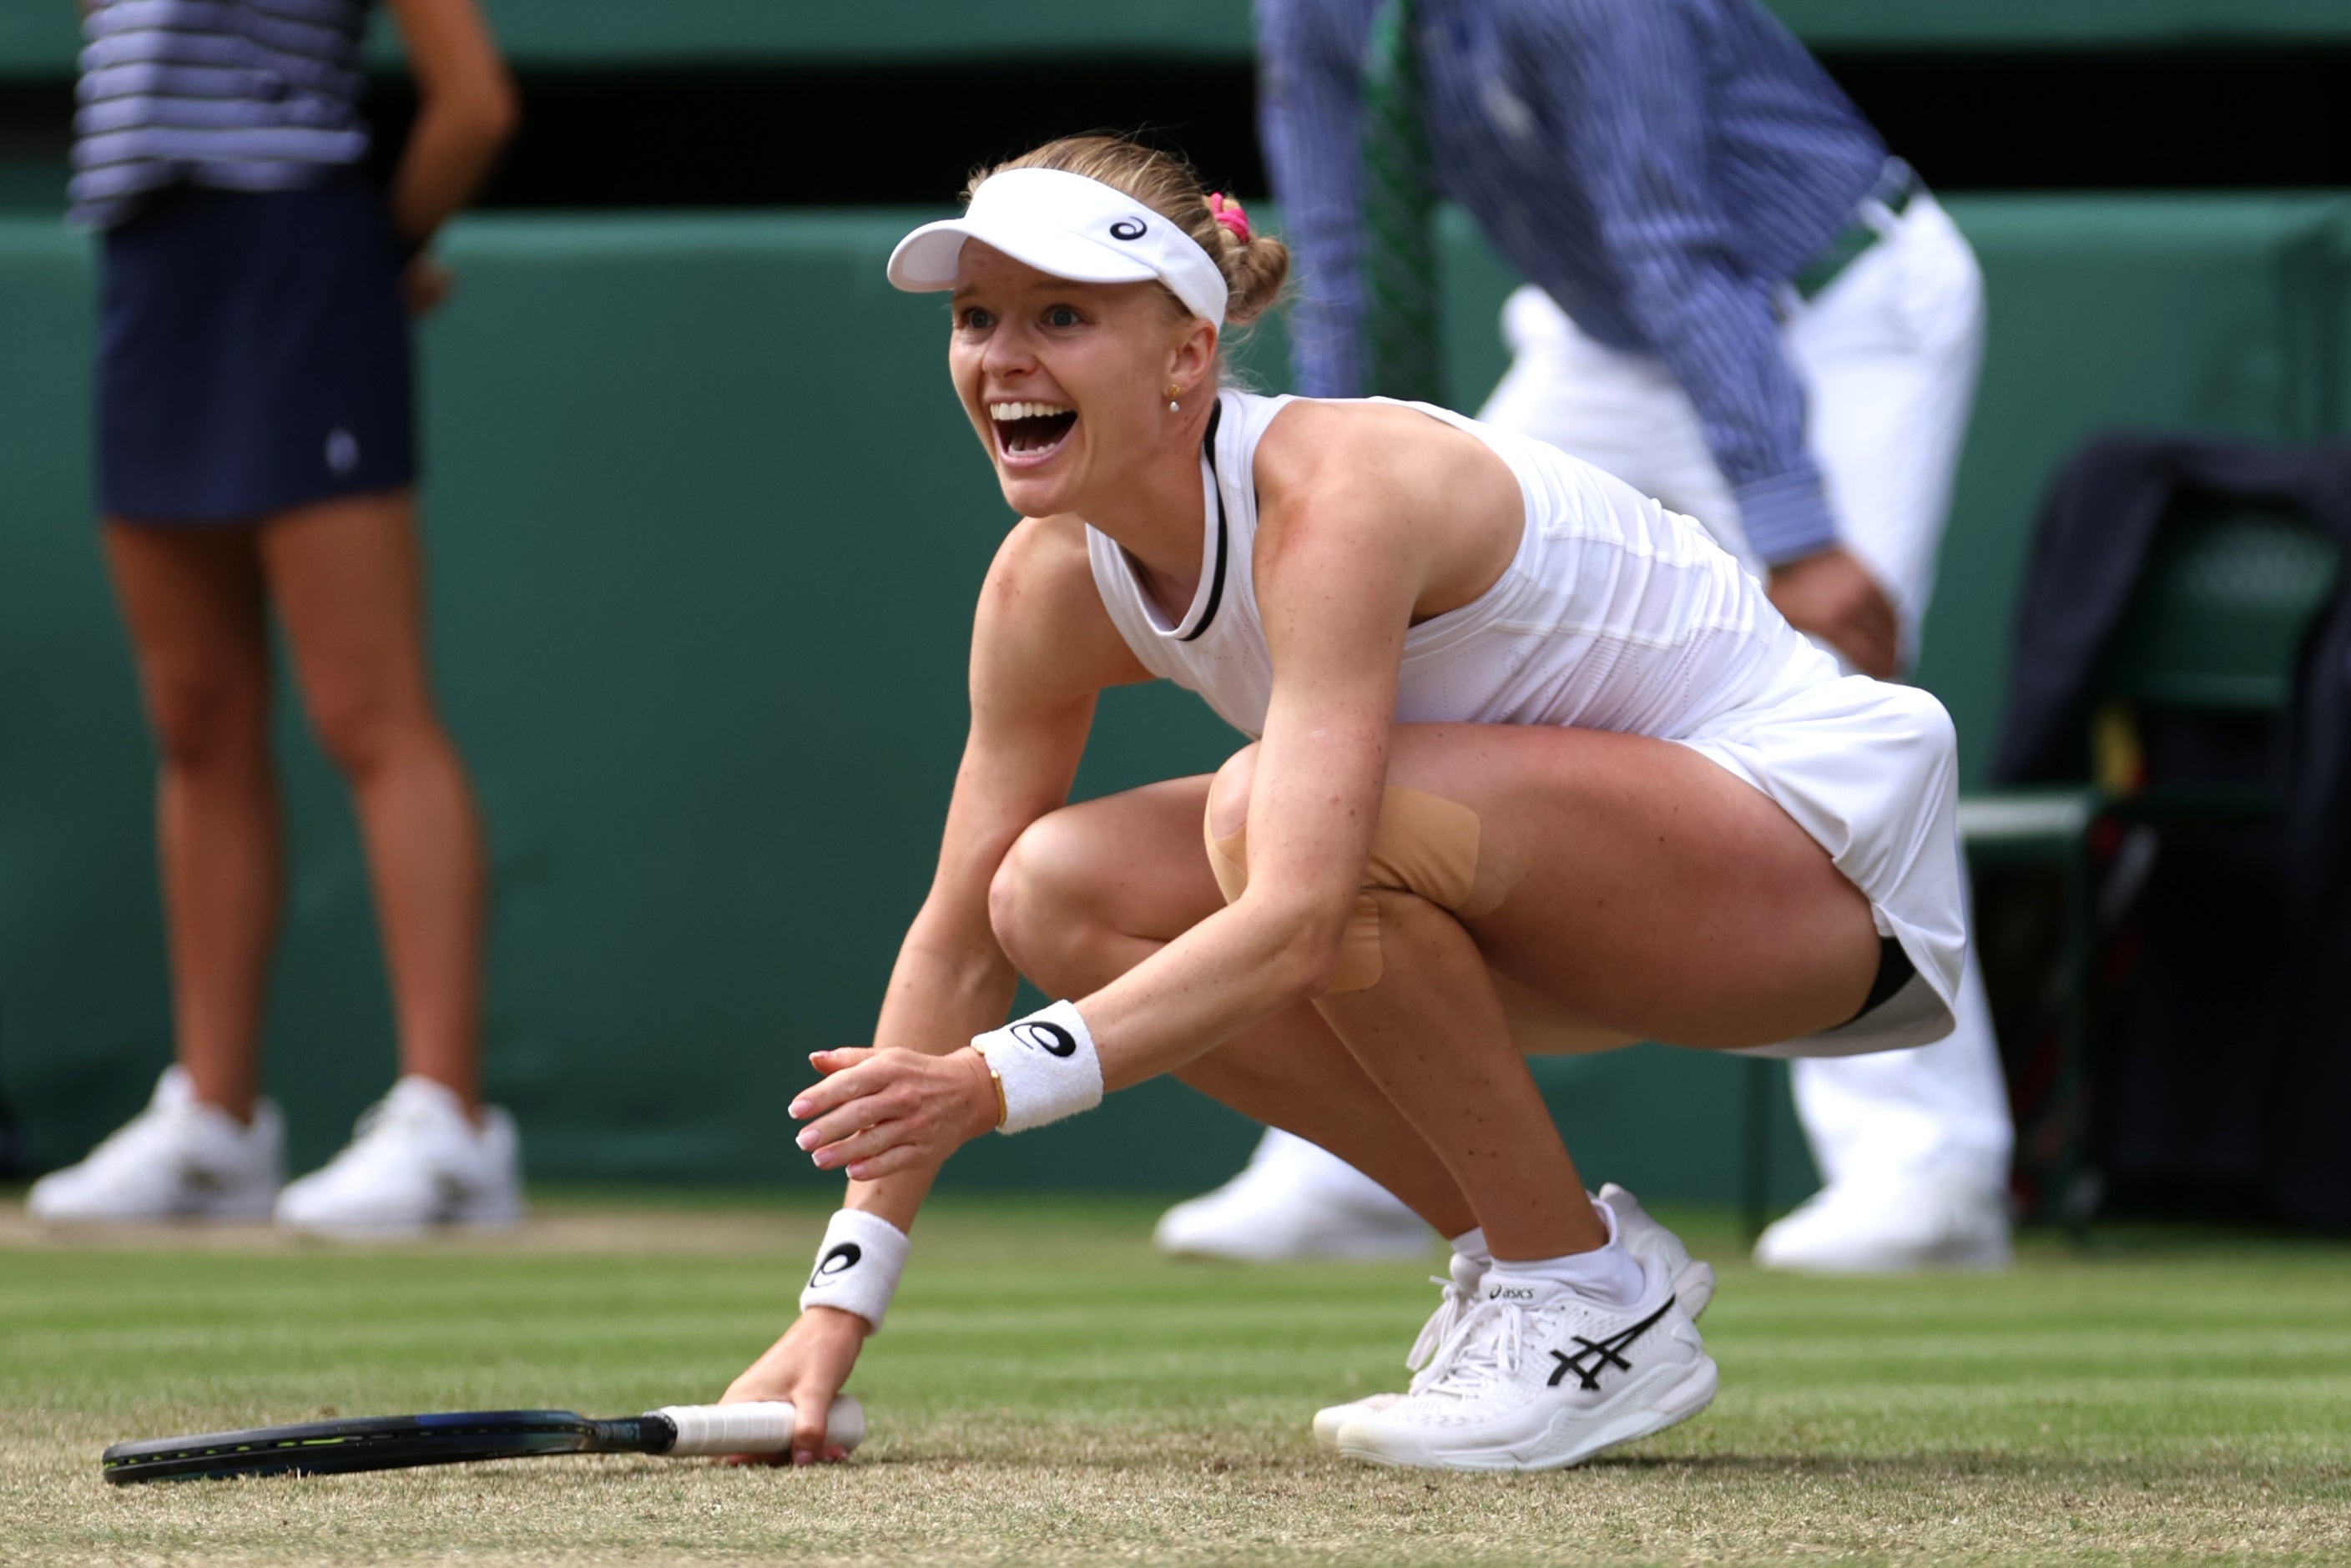 Harriet Dart reacts after clinching victory over Katie Boulter